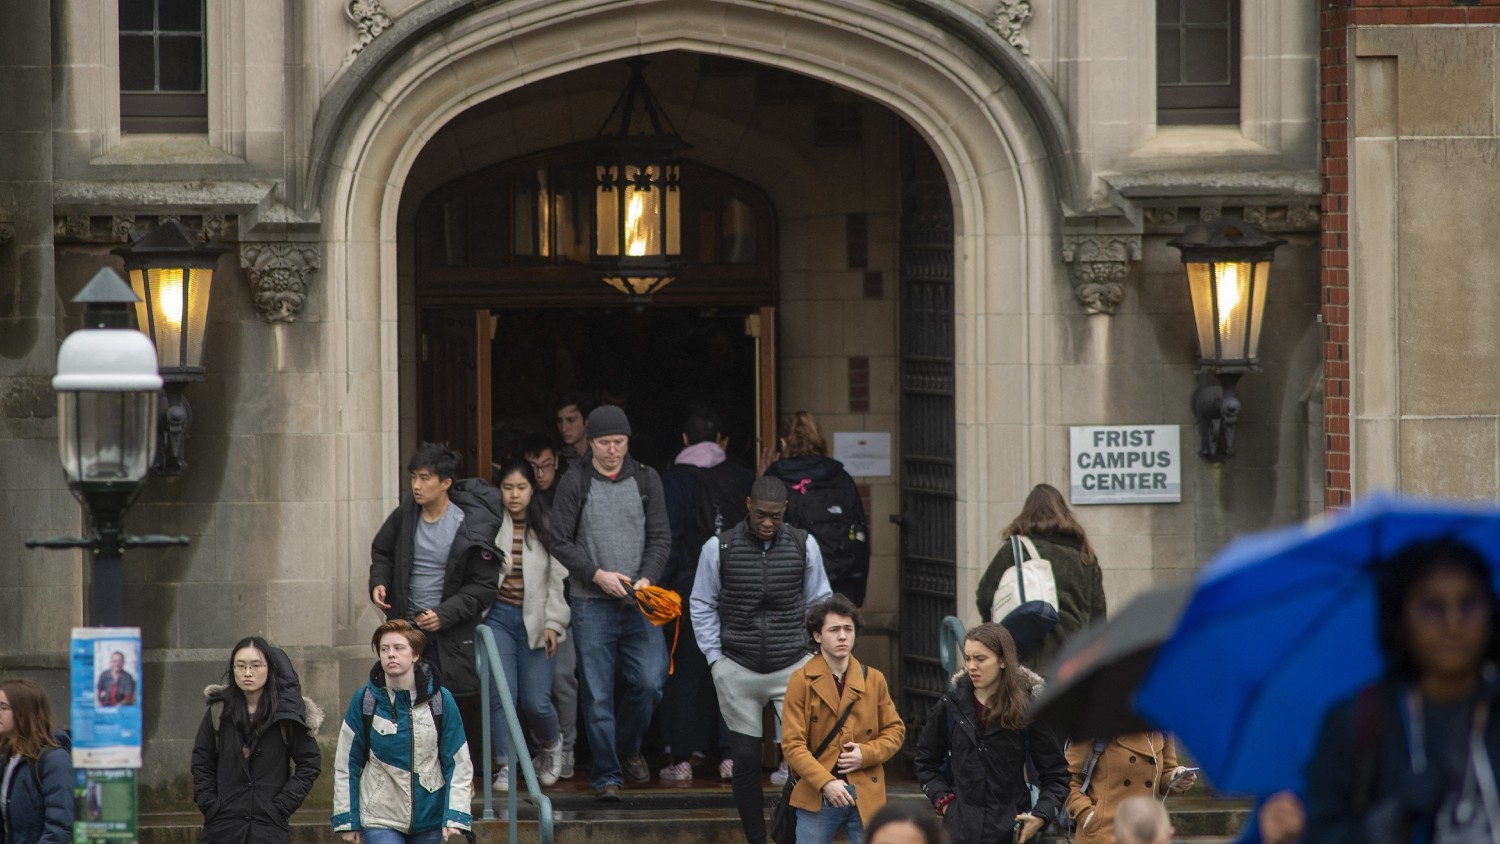 Students exit a building between classes at Princeton University on 4 February 2020 in Princeton, New Jersey.